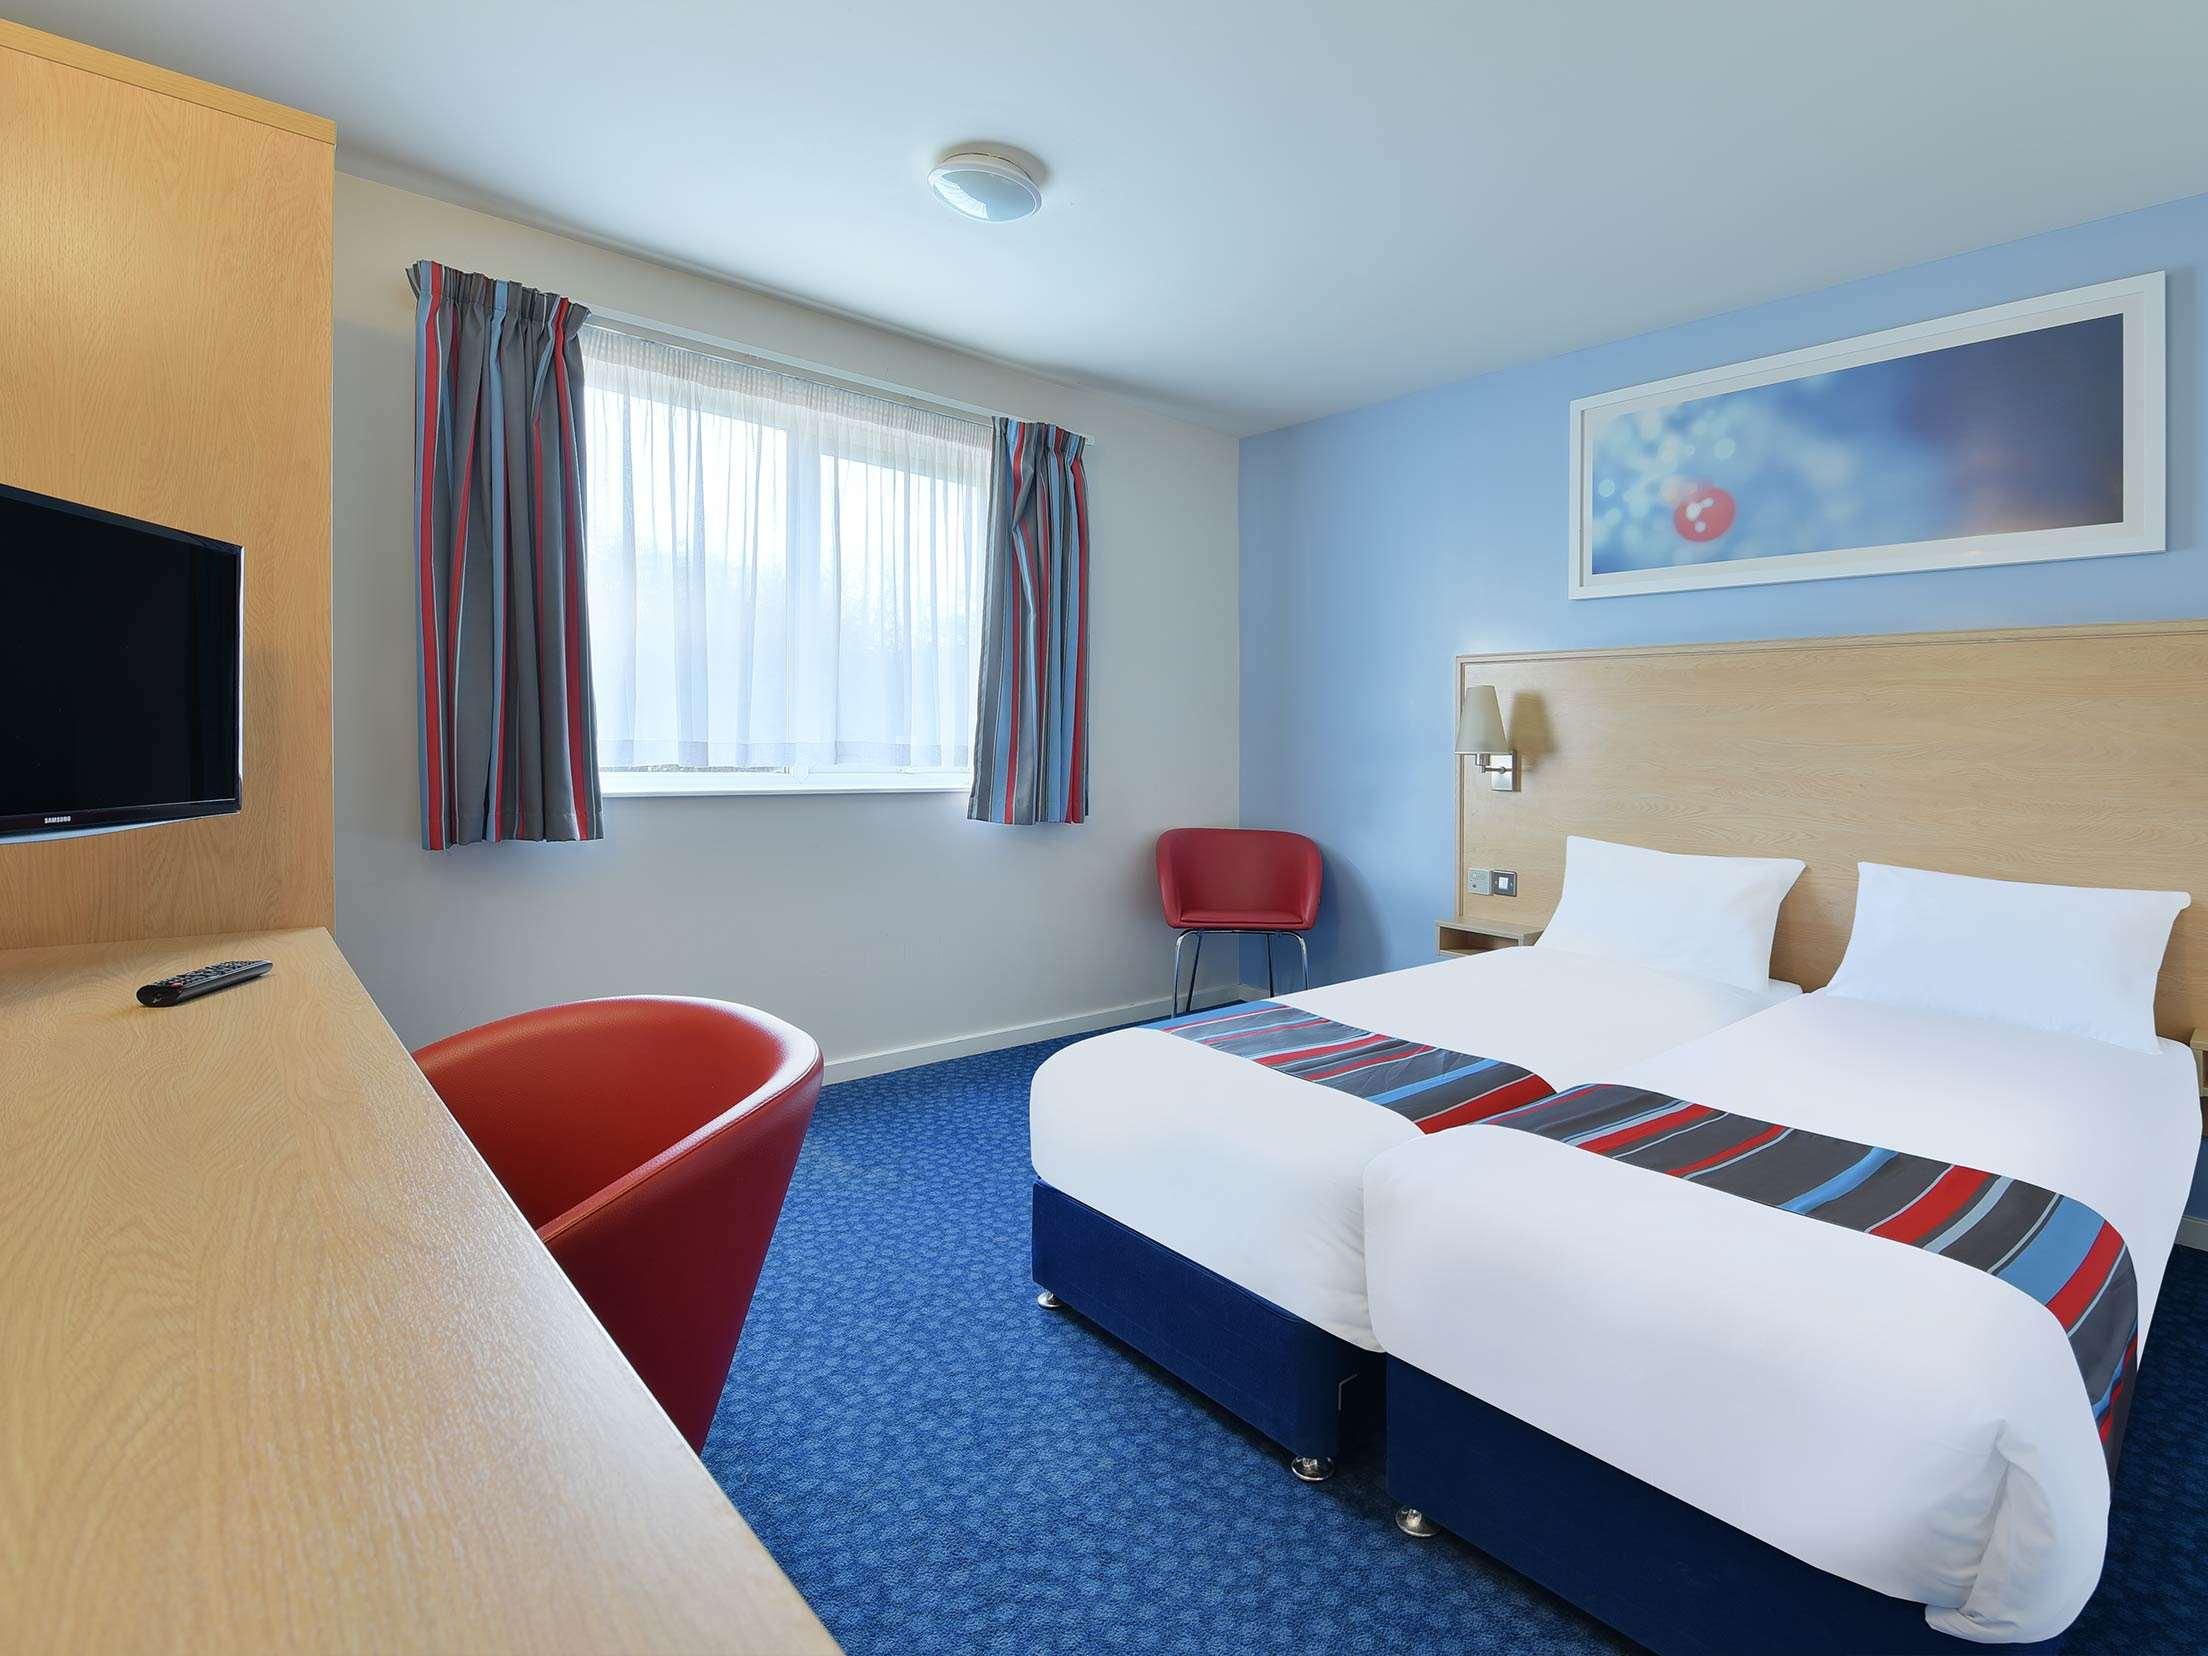 Travelodge Cardiff Central